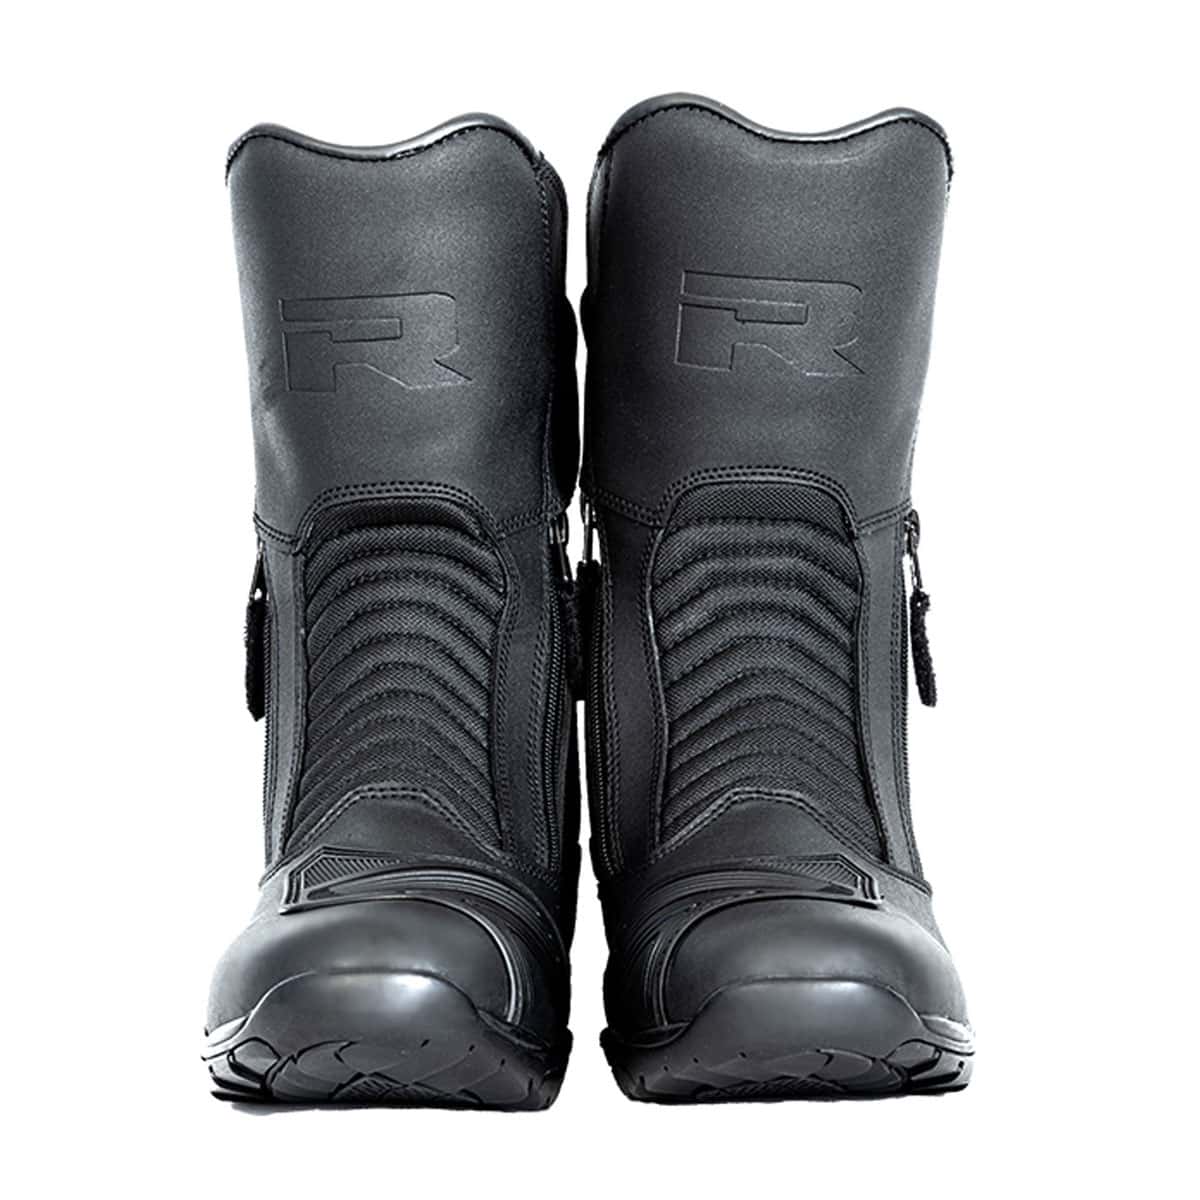 Richa waterproof long touring boots with double zip opening for ease - front